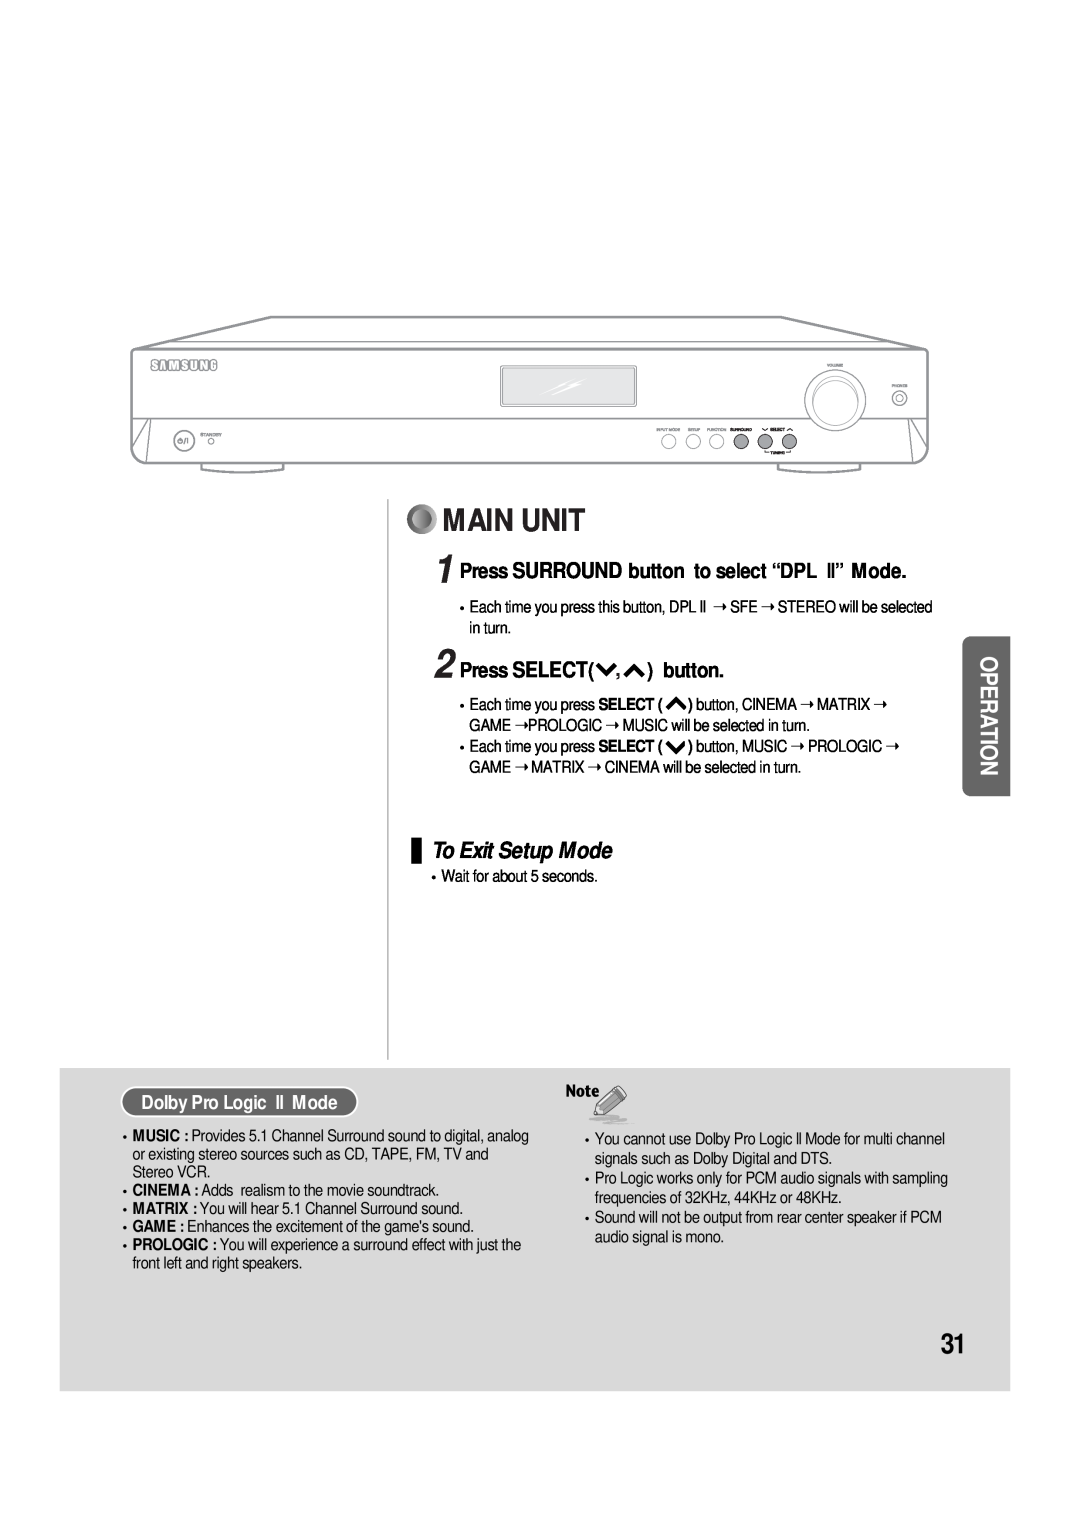 Samsung AV-R610 manual Main Unit, To Exit Setup Mode, Press SURROUND button to select “DPL ll” Mode, Press SELECT, button 